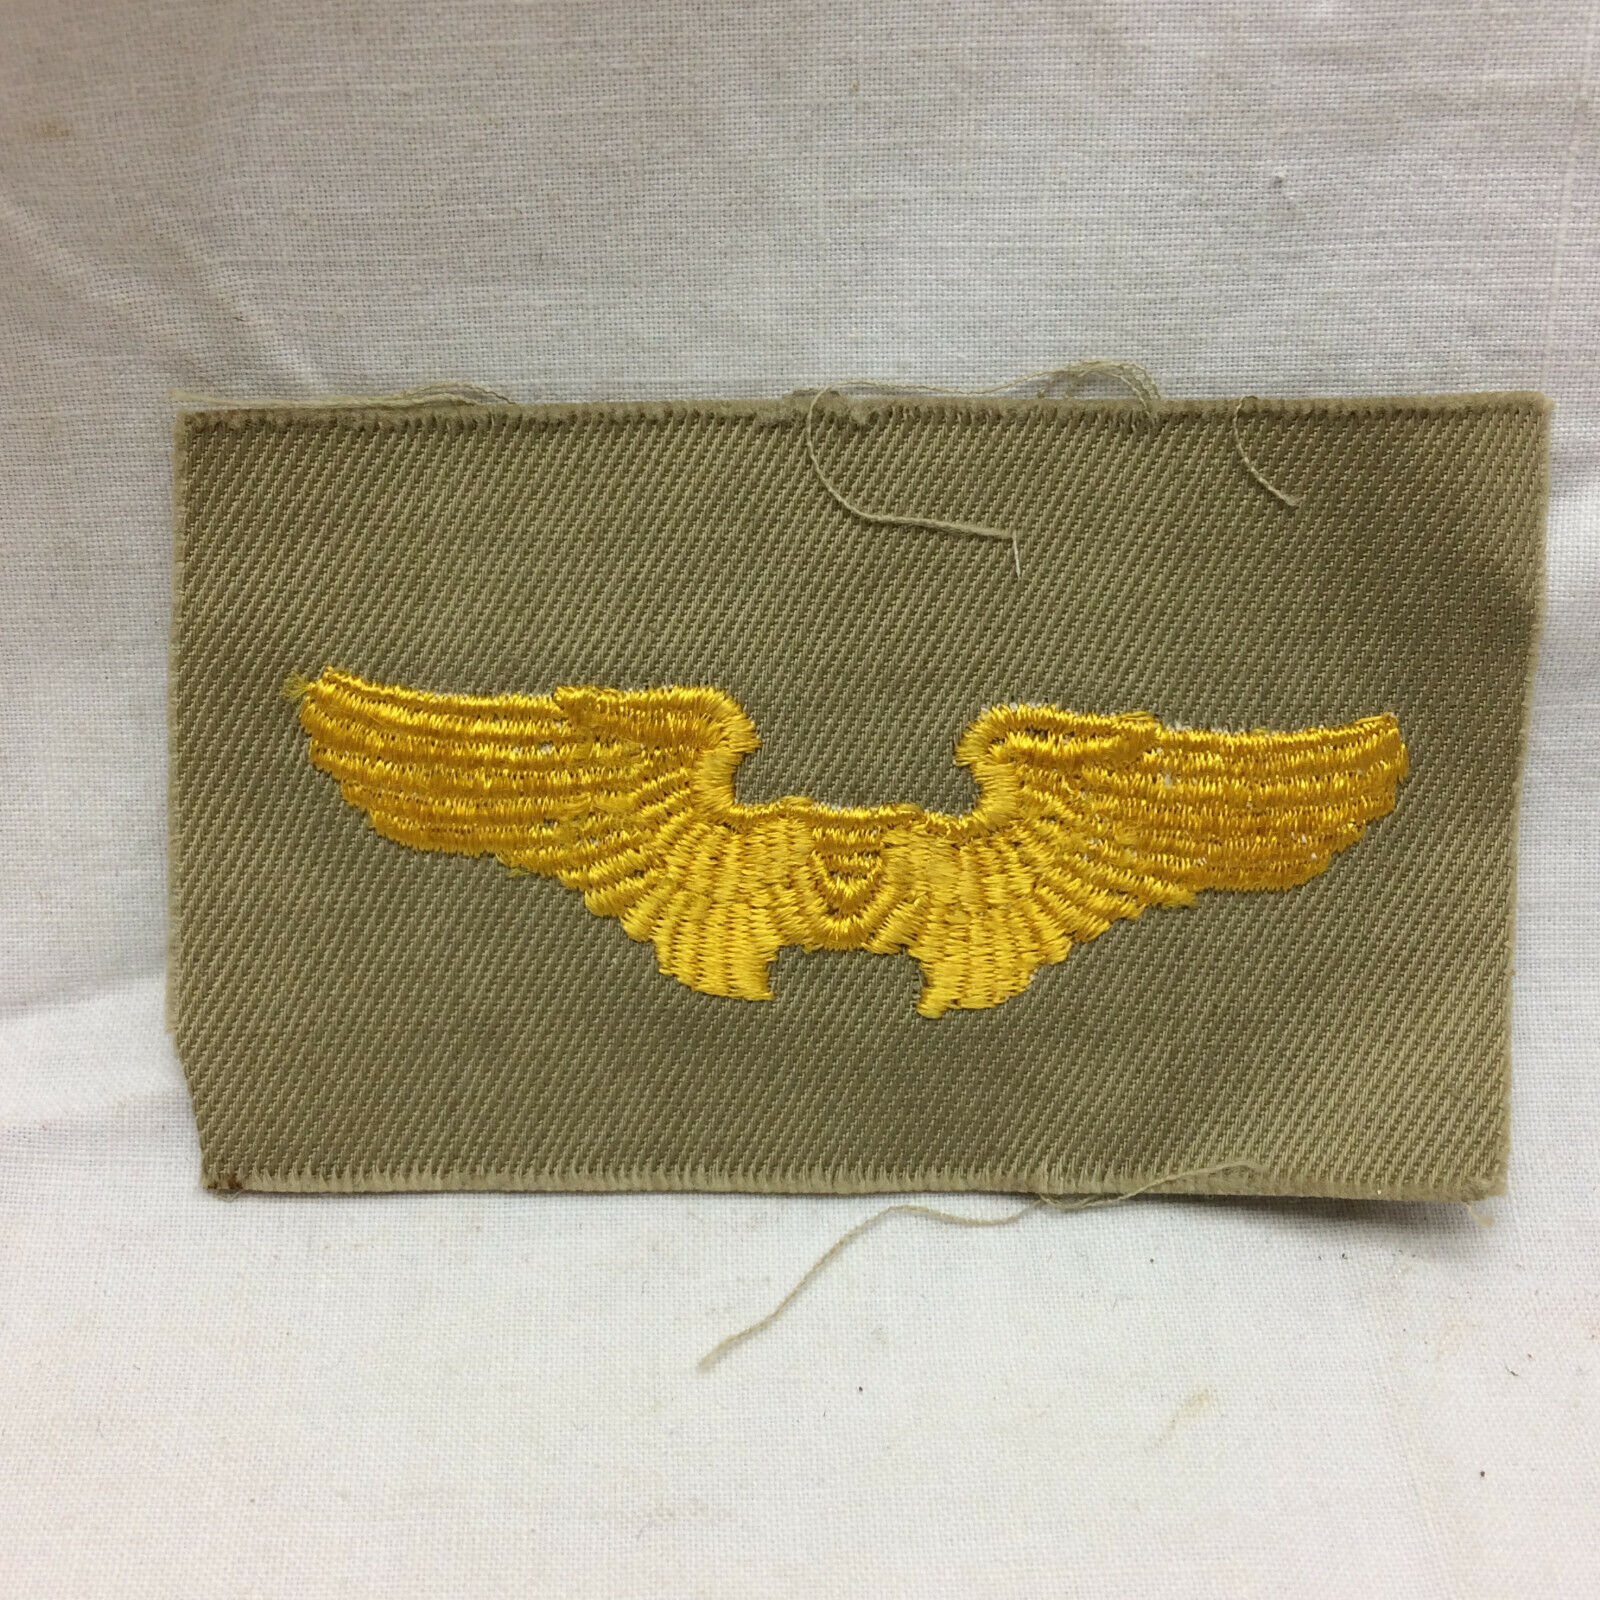 Vintage Military U.S.A.A.F. Flight Instructor Patch Badge 